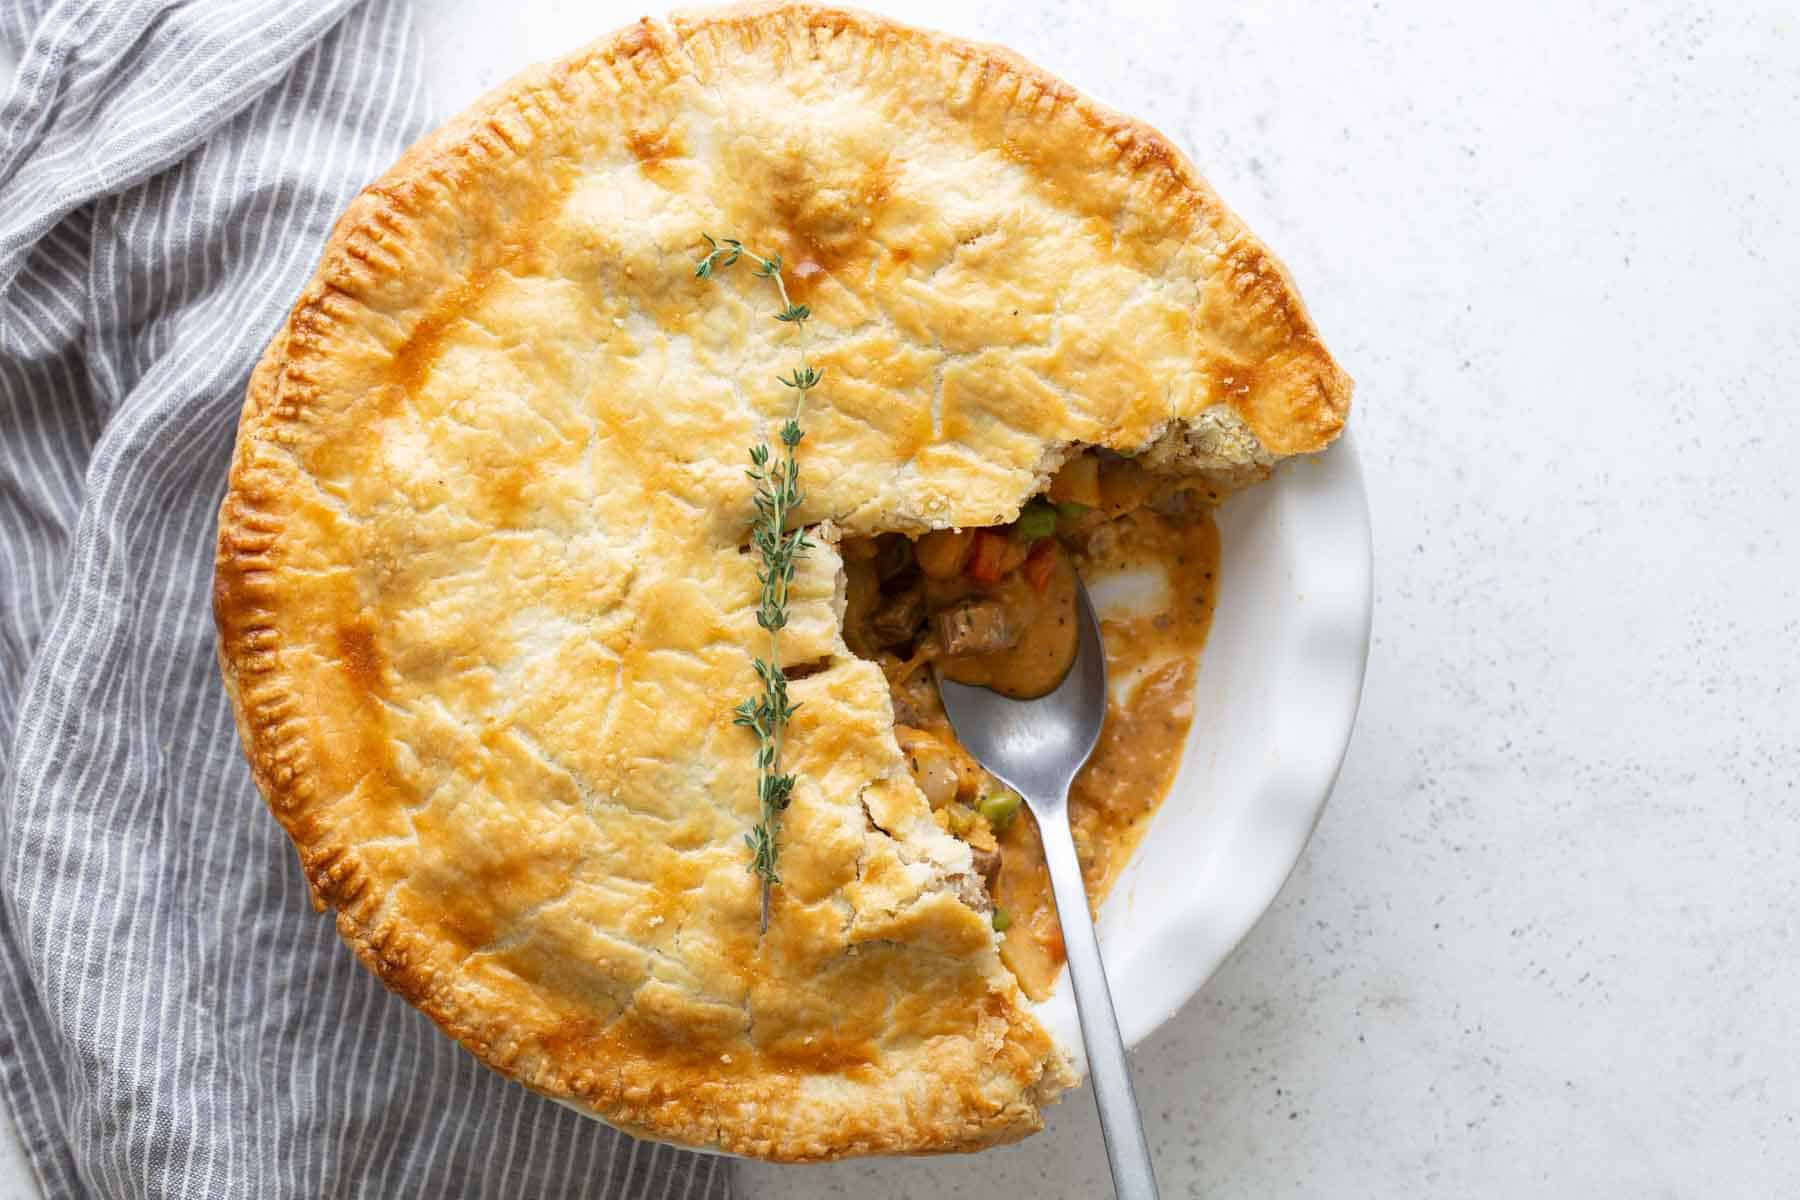 A homemade beef pot pie with a flaky crust, partially sliced to show its creamy filling of beef and vegetables, garnished with fresh thyme.